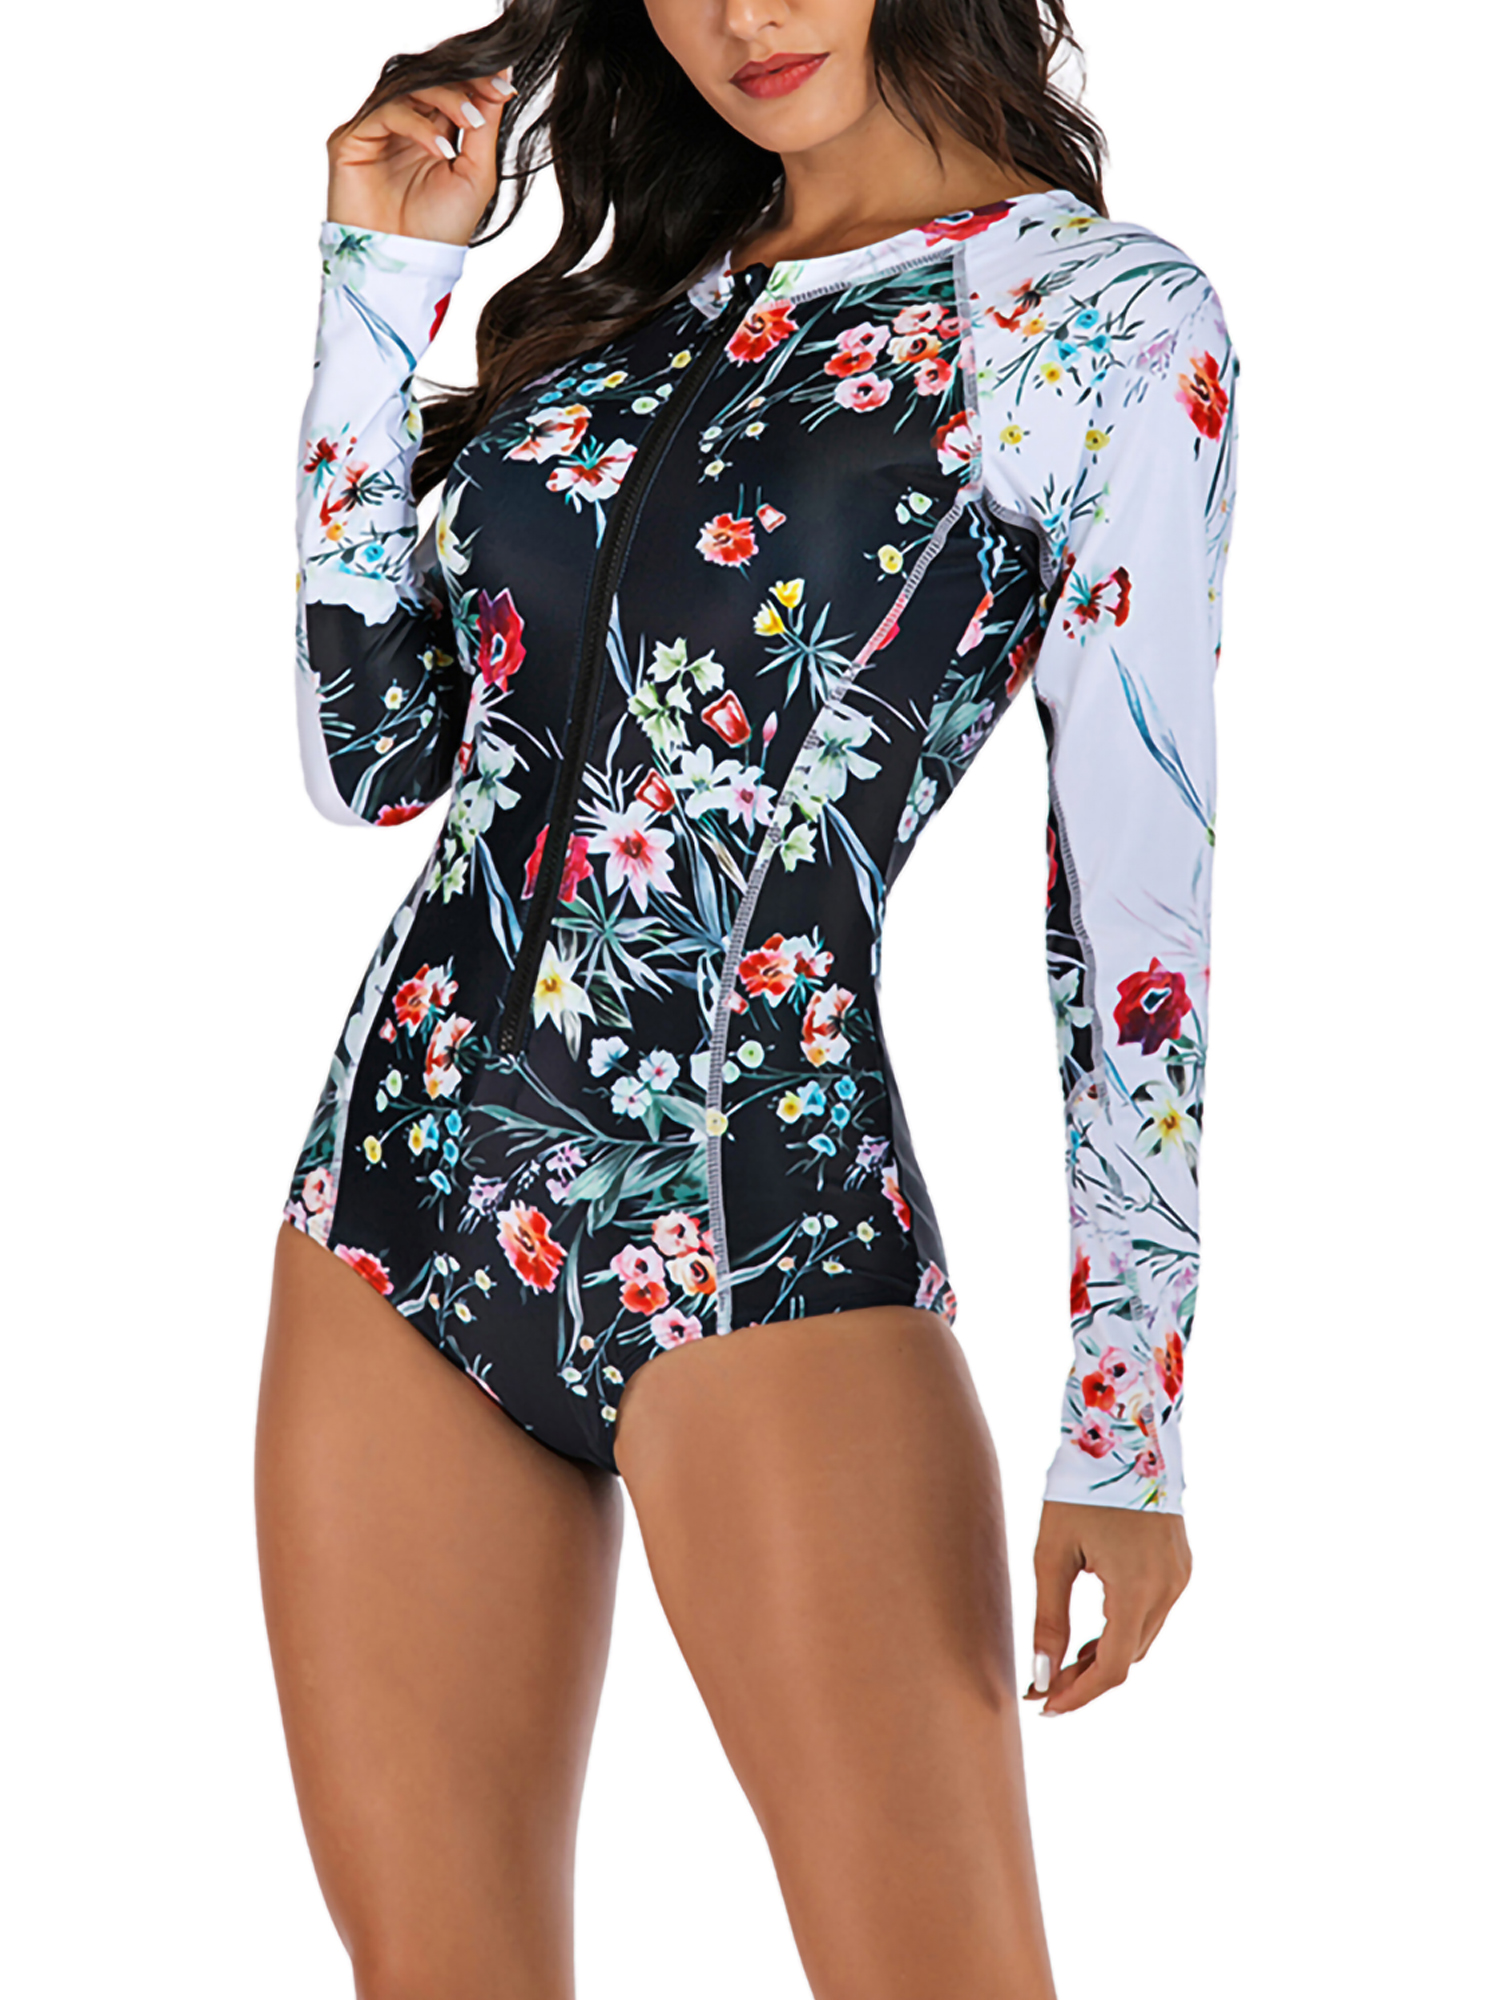 Sexy Dance Women's One Piece Swimsuit Long Sleeve Zip Floral Print Swimwear Bathing Suits for Surfing,Diving,Swimming,Rashguard - image 3 of 8